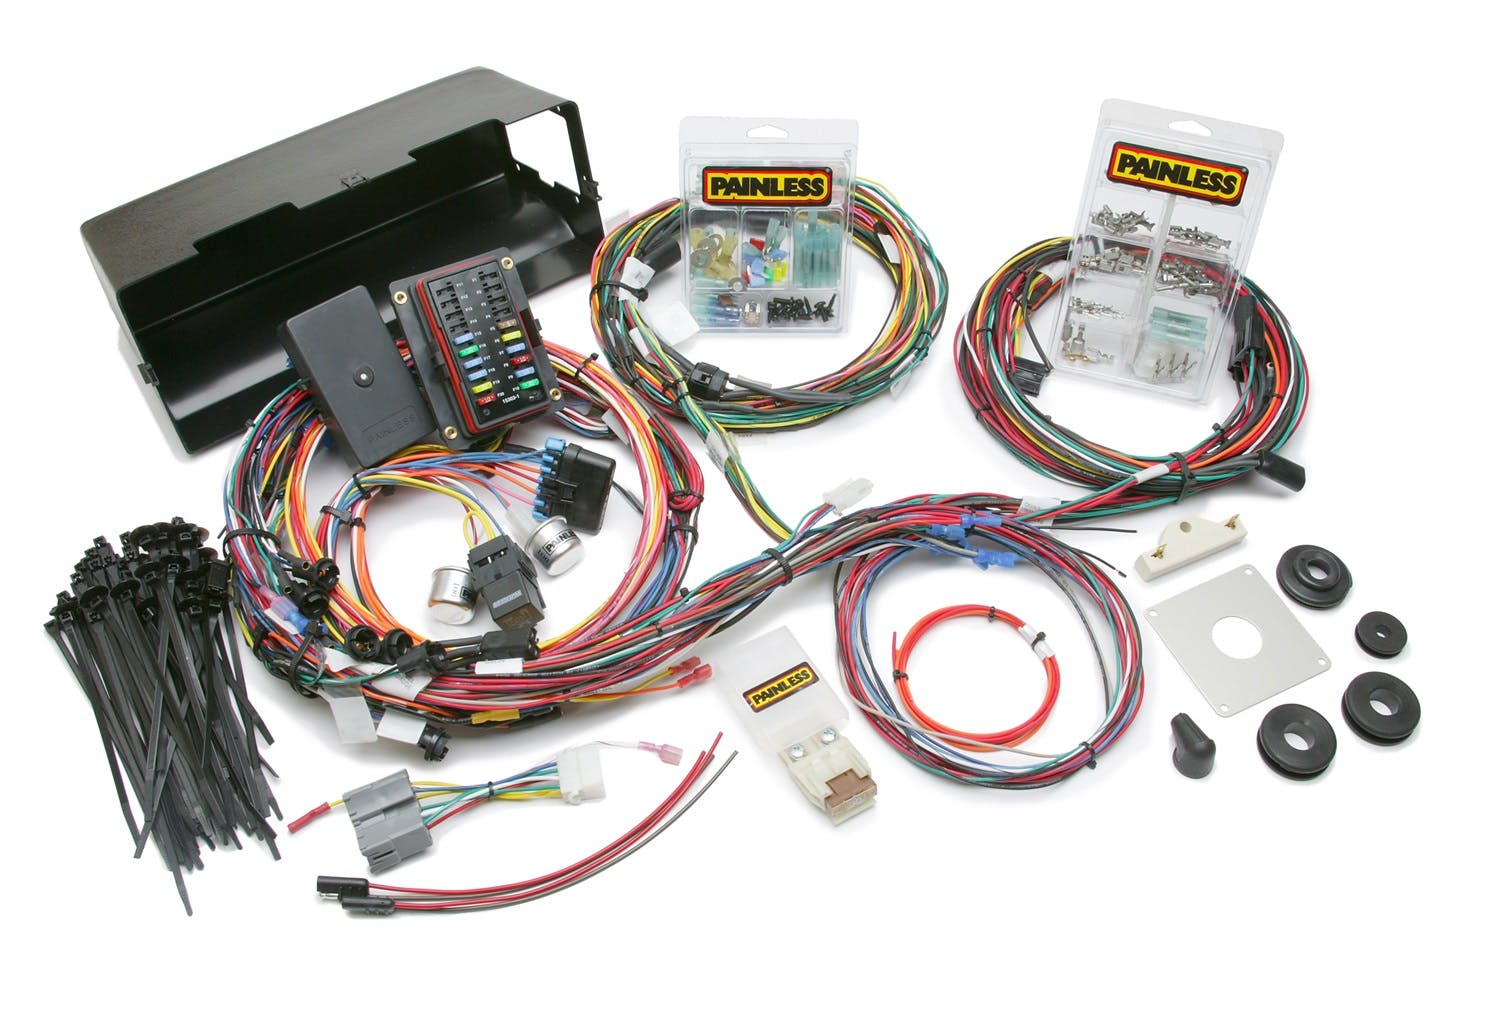 Painless 10114 23 Circuit Chassis Wiring Harness without Switches